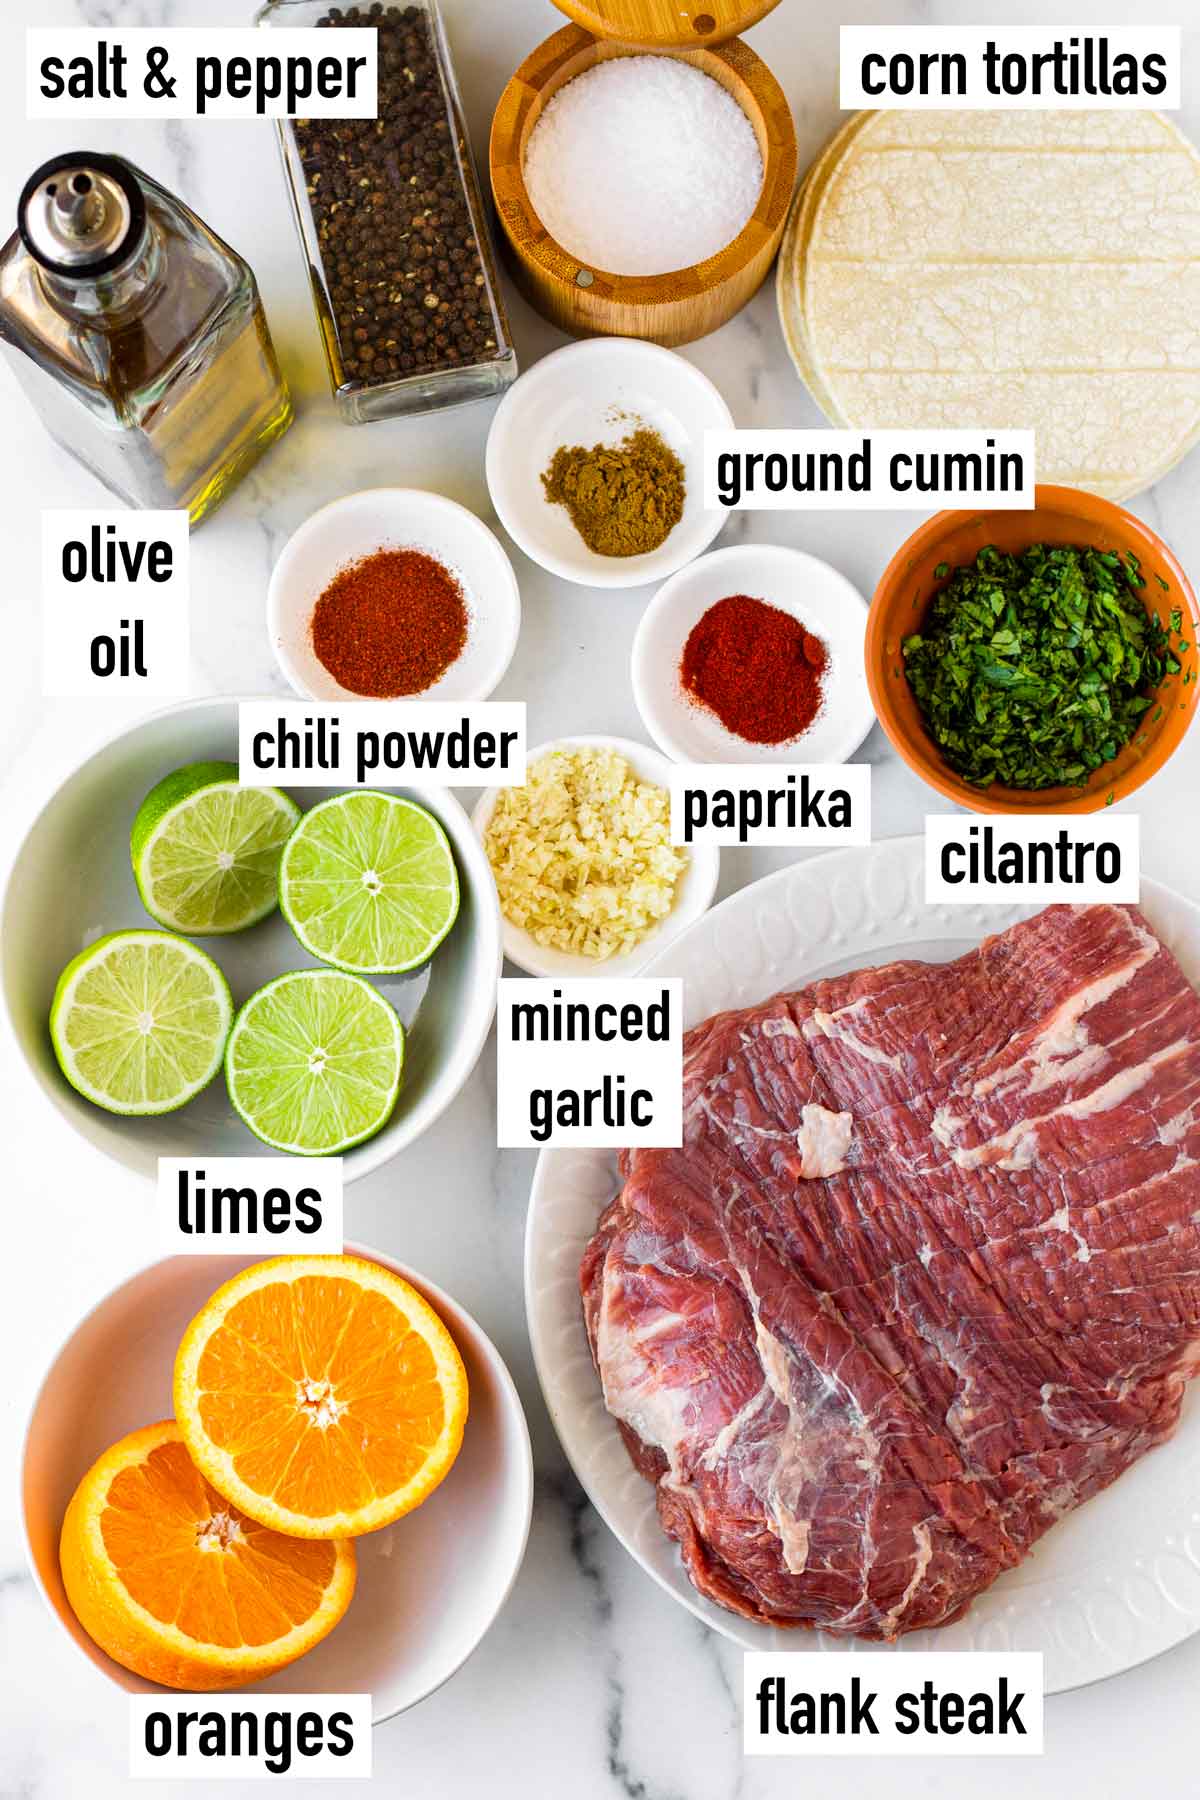 labeled ingredients for steak and marinade